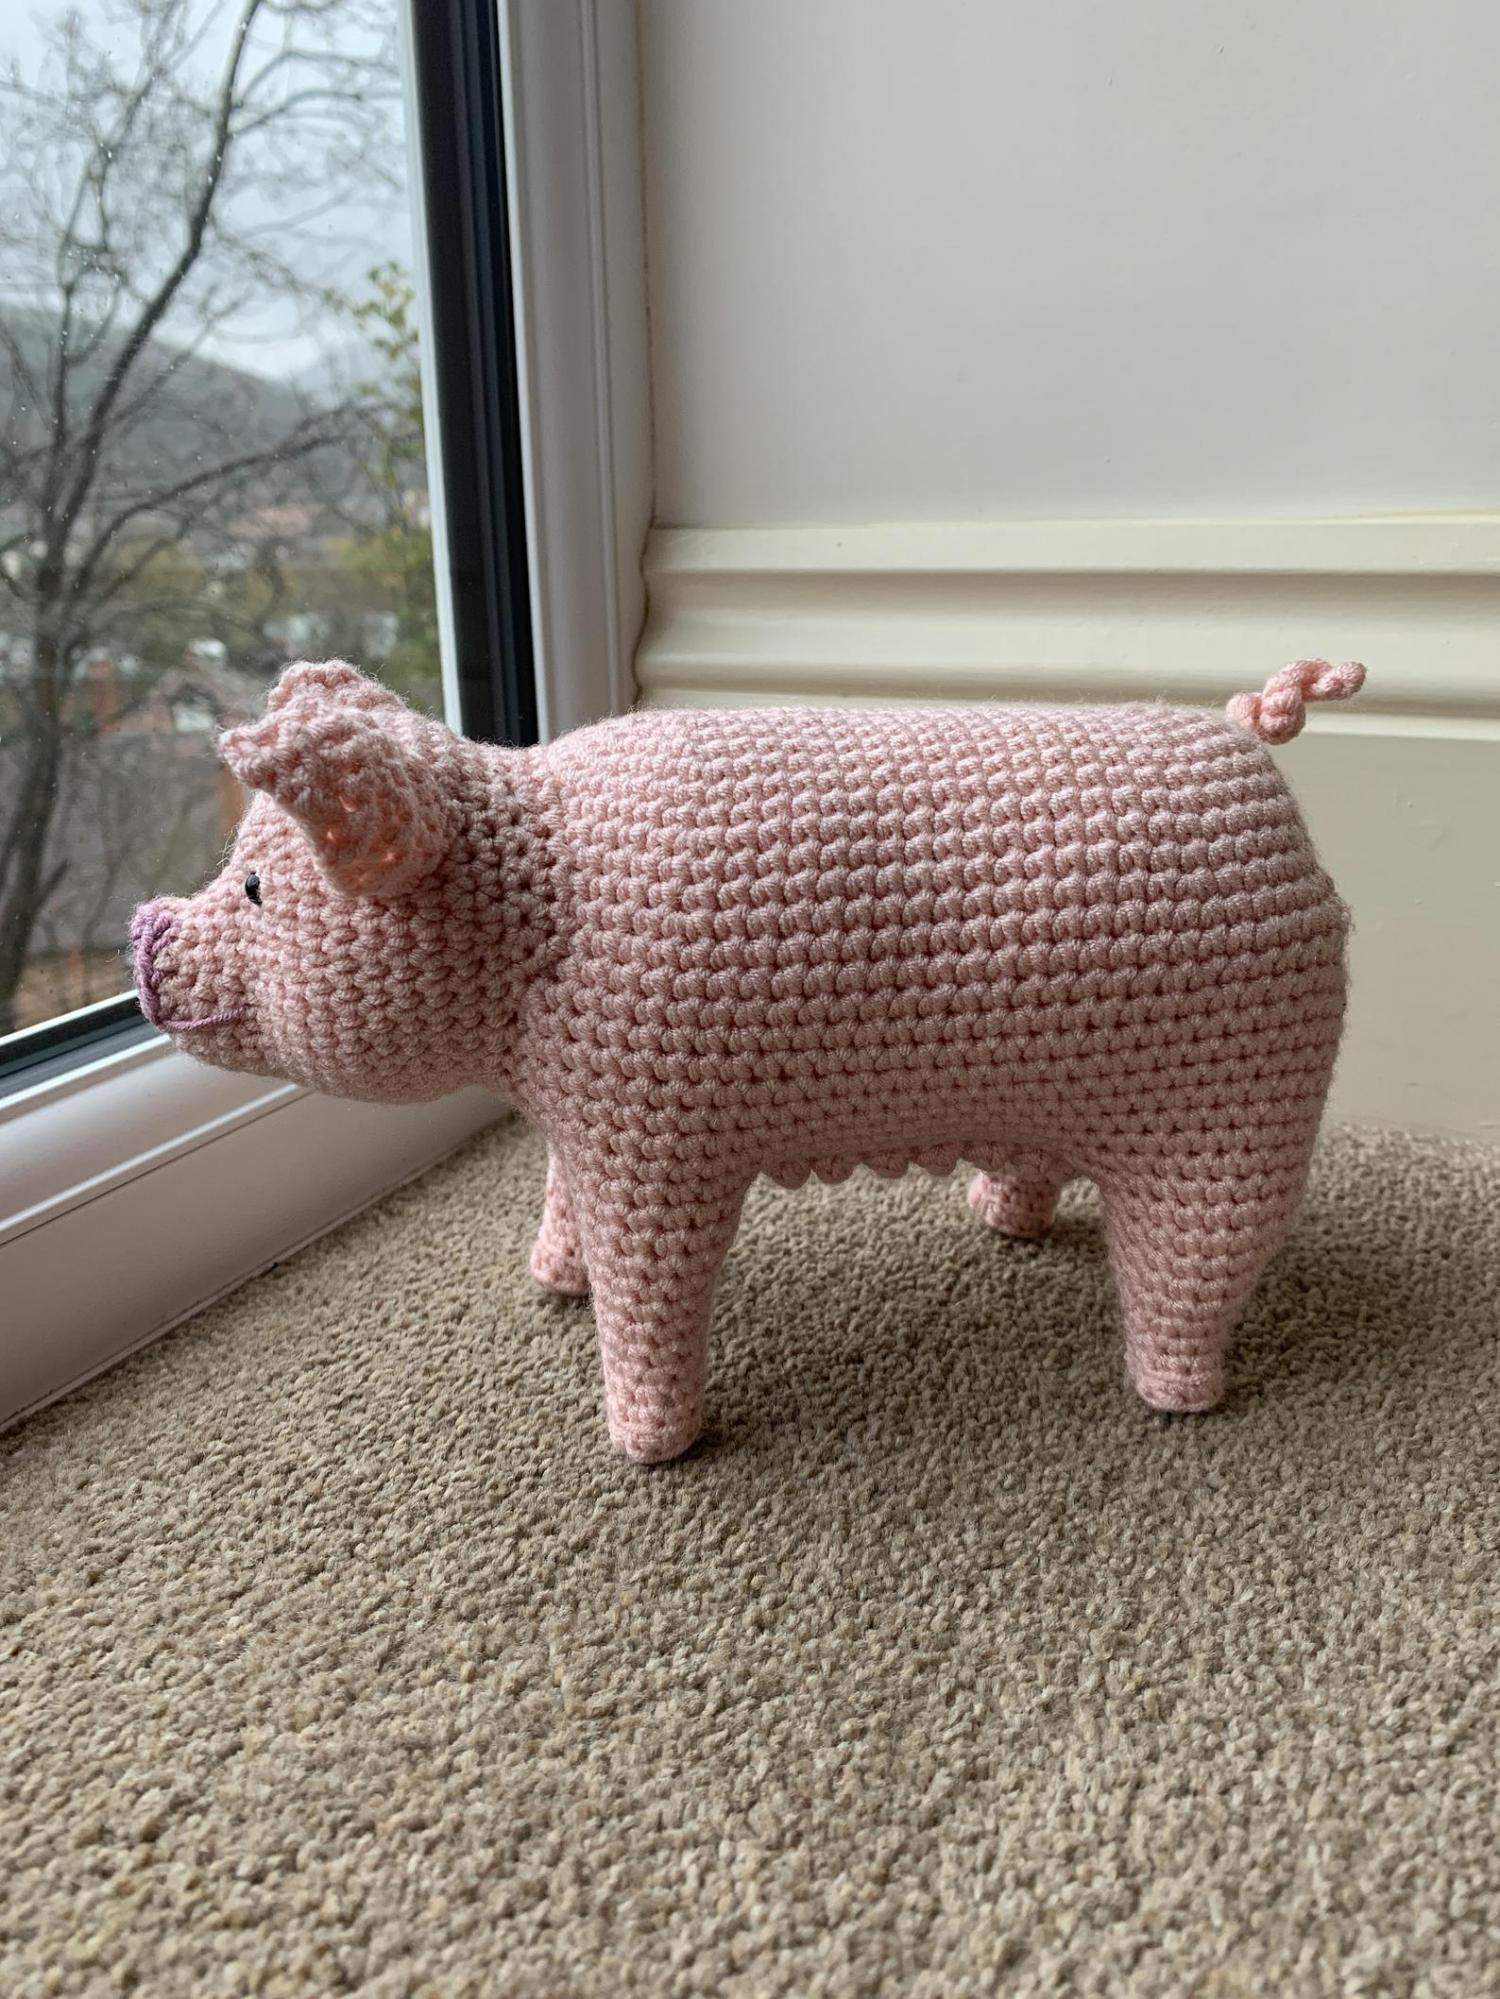 Birthing Pig That Feeds Its Piglets - Pig with Piglets Crochet Pattern